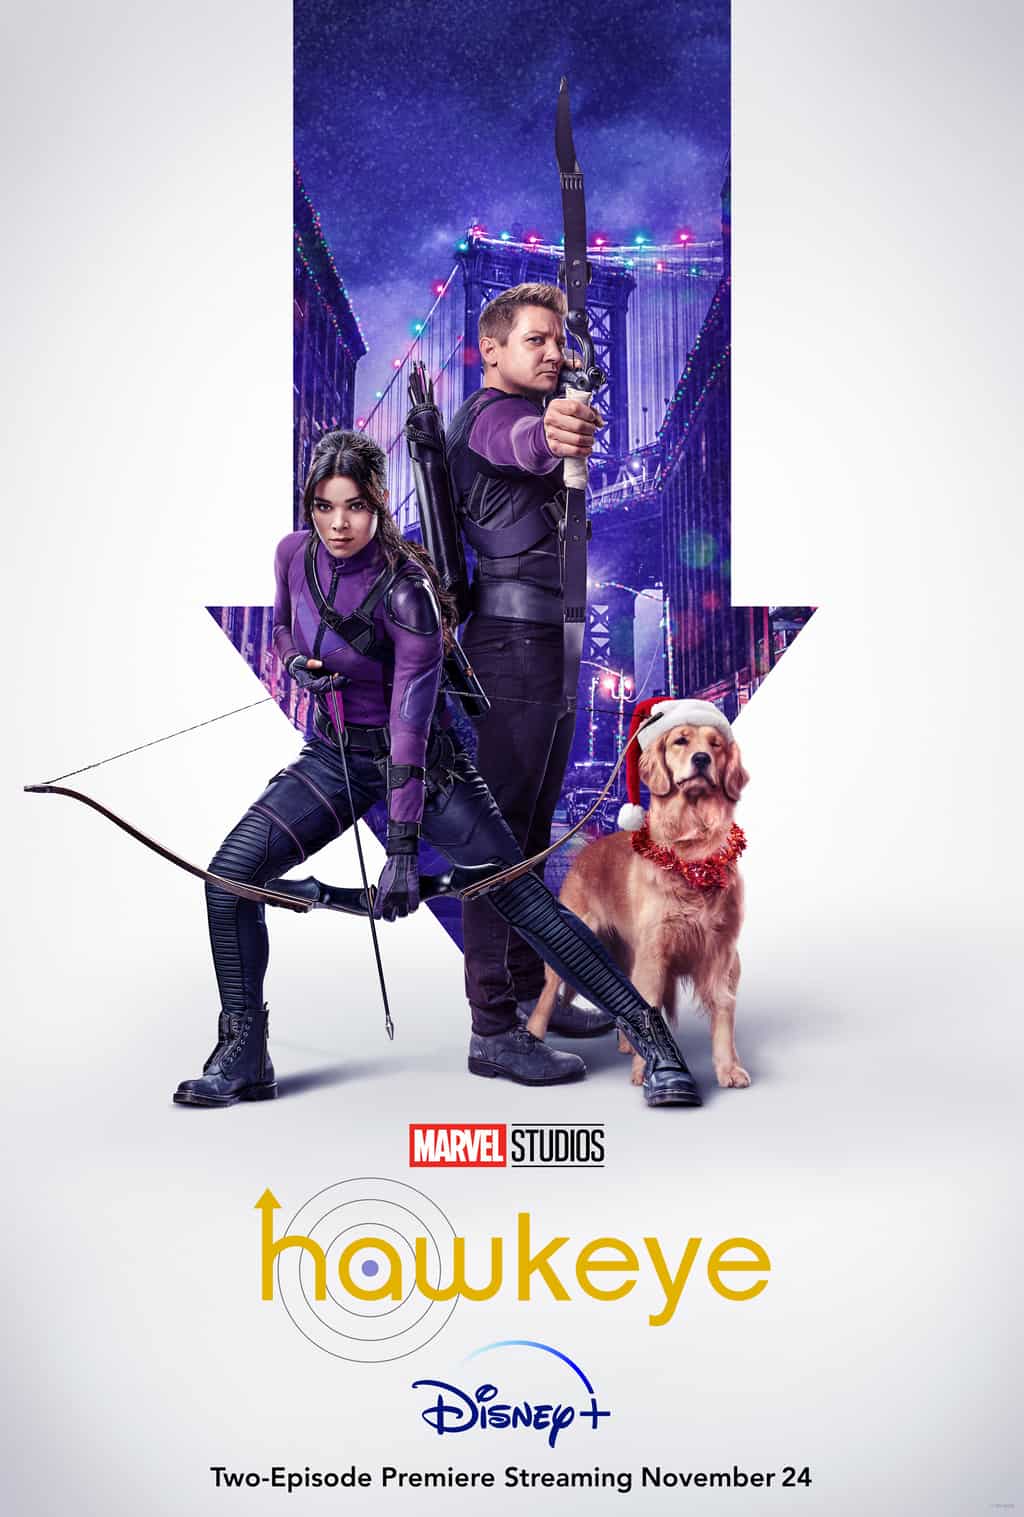 kate clint and lucky on hawkeye poster. Is this one OK for kids